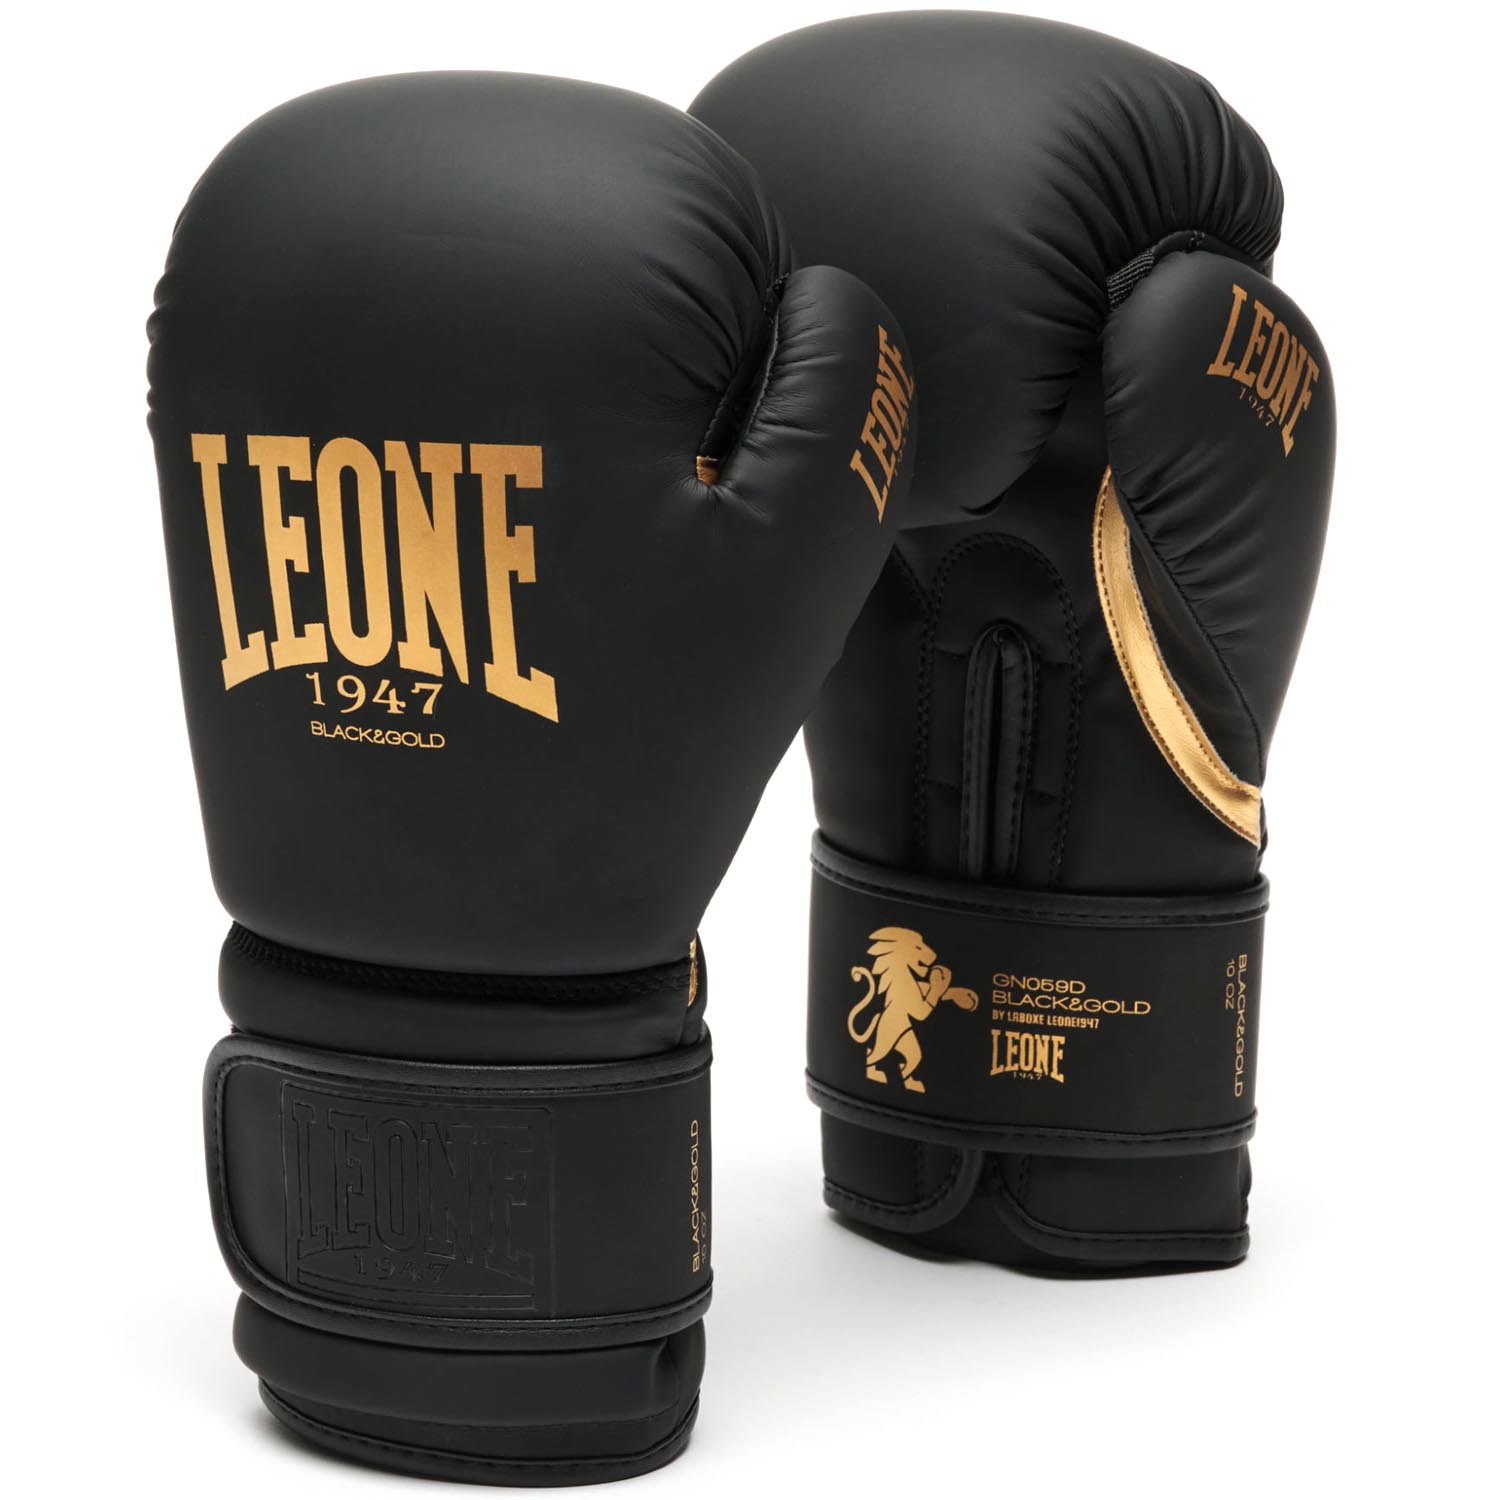 now for - great Gloves beginners with with quality perfect price Boxing low and shop